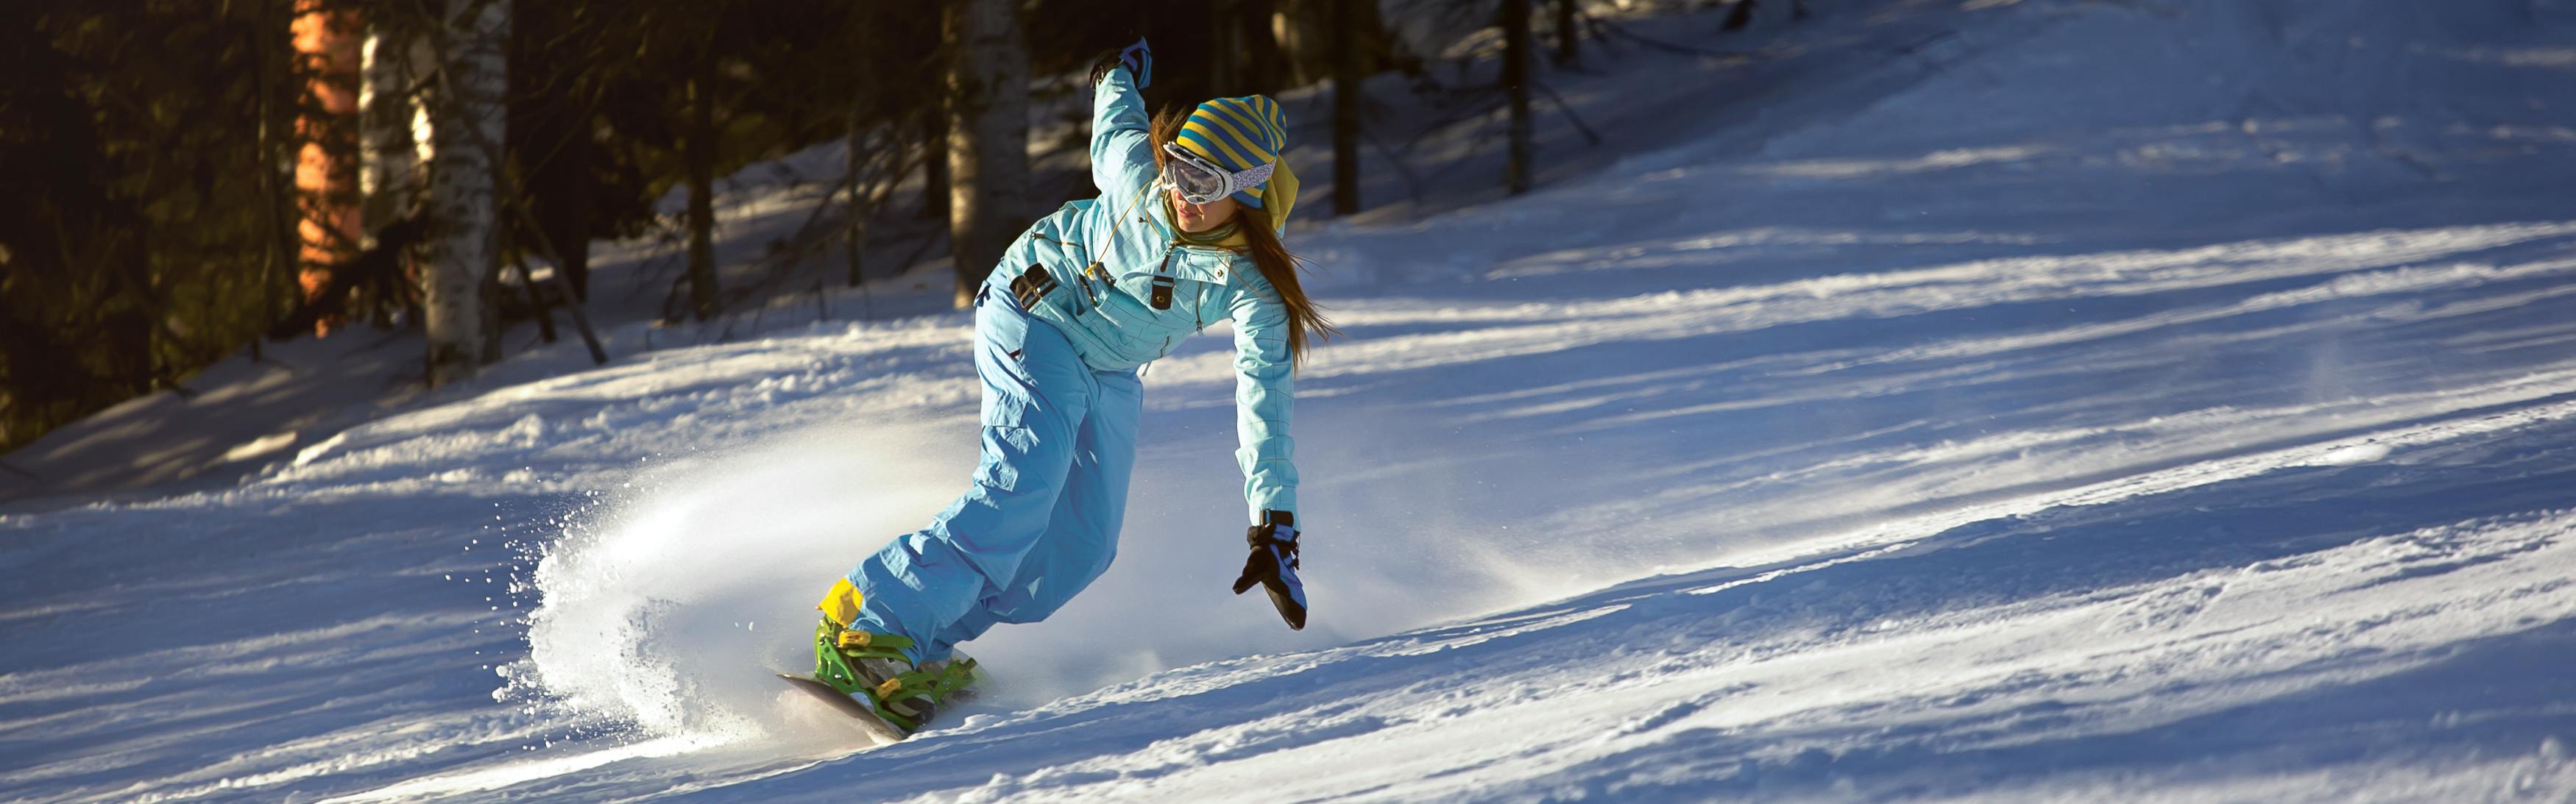 Snowboarding 101: How to Snowboard in Icy Conditions